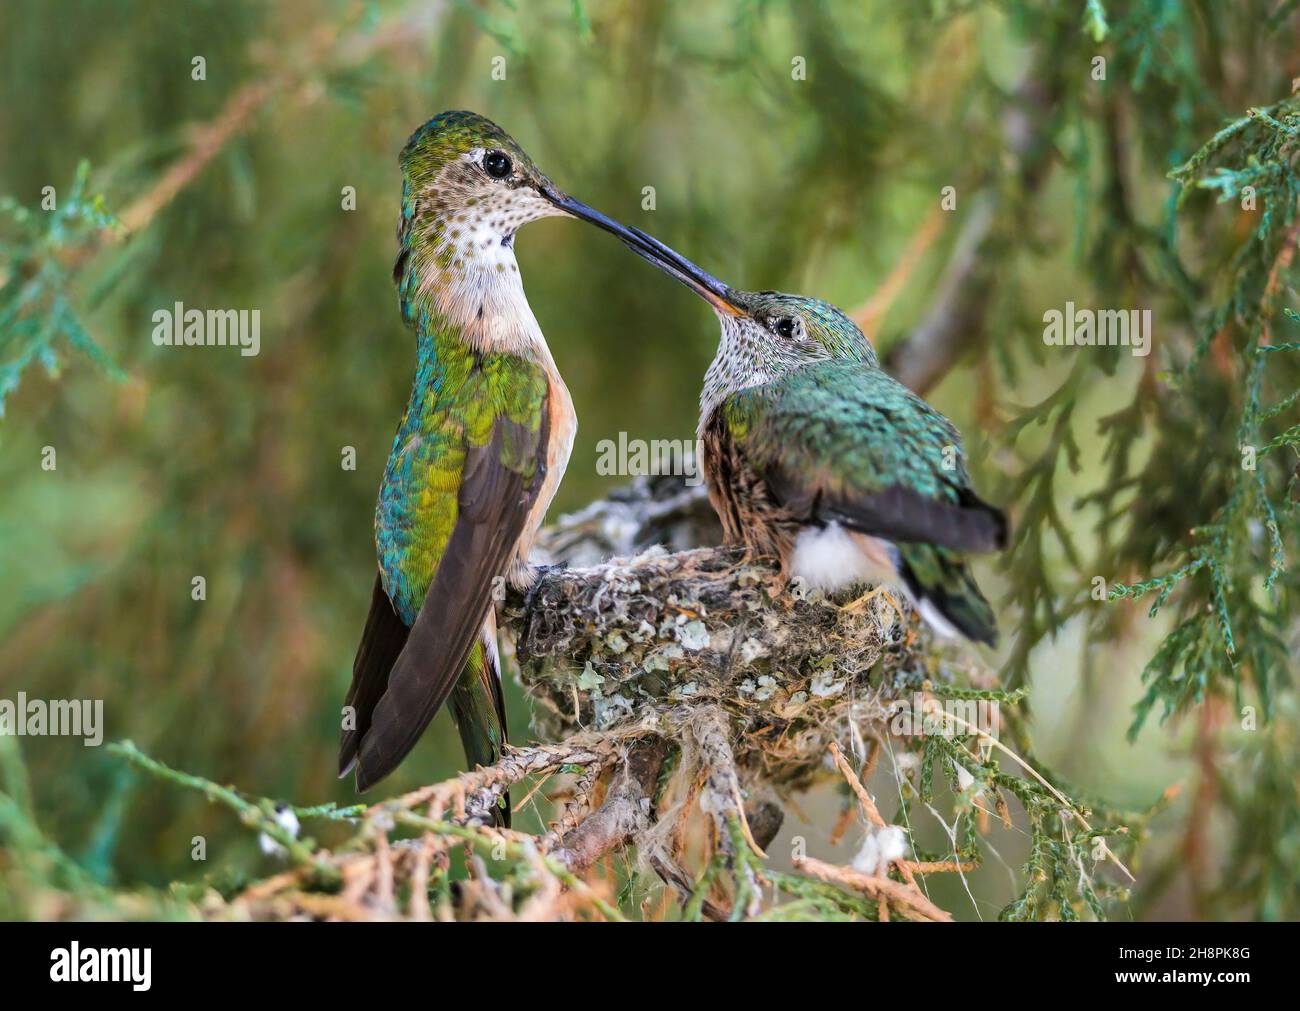 A Broad-tailed Hummingbird and her chick tenderly connecting and gazing at each other during feeding time at the nest. Stock Photo